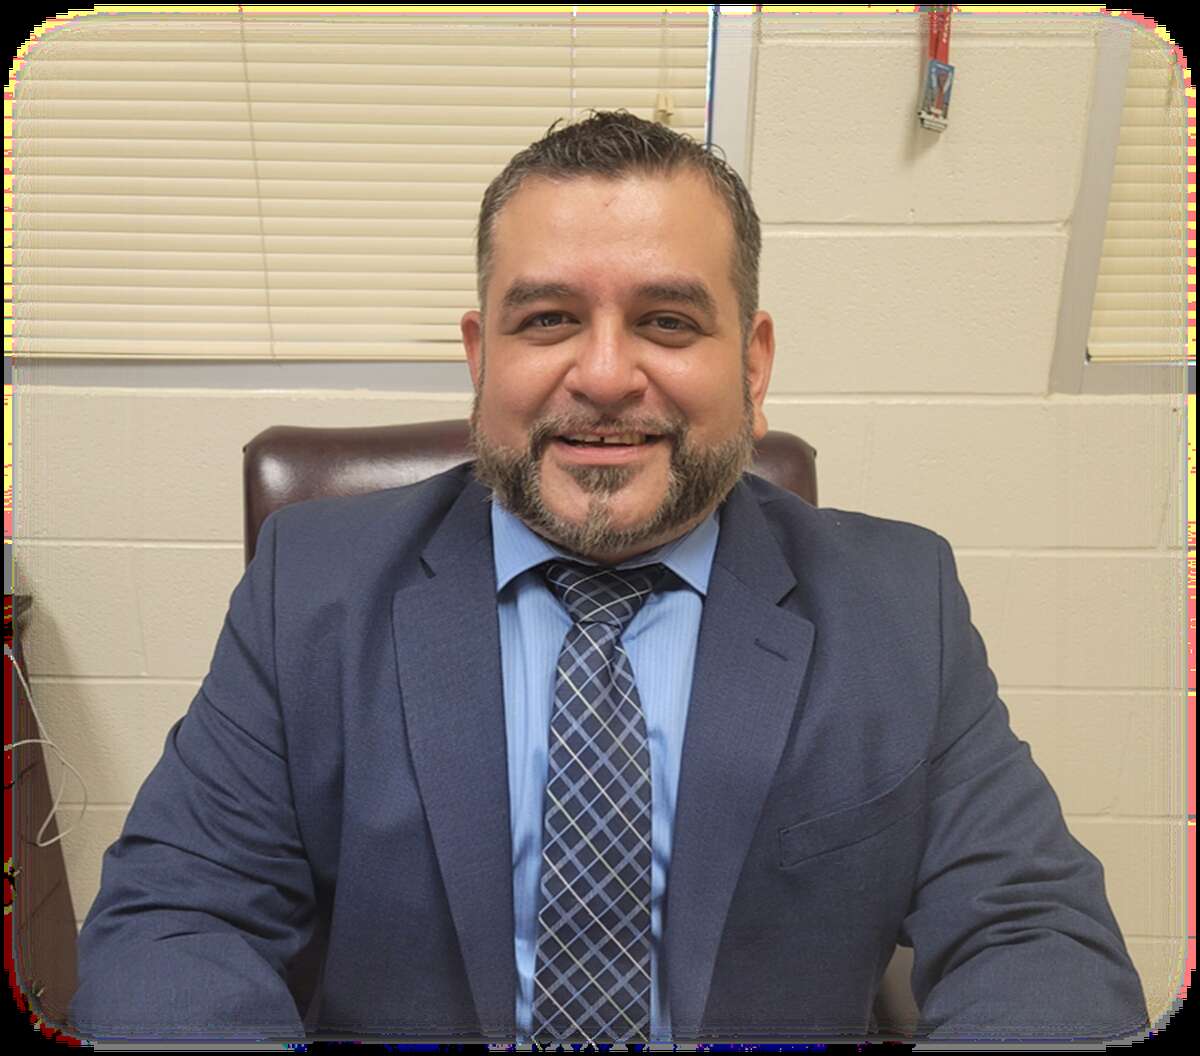 Guadalupe Cortinas is the assistant principal at Farias Elementary School. Cortinas was placed on leave after an arrest for allegedly trying to smuggle eight individuals into the country, but charges were dropped by the federal government.